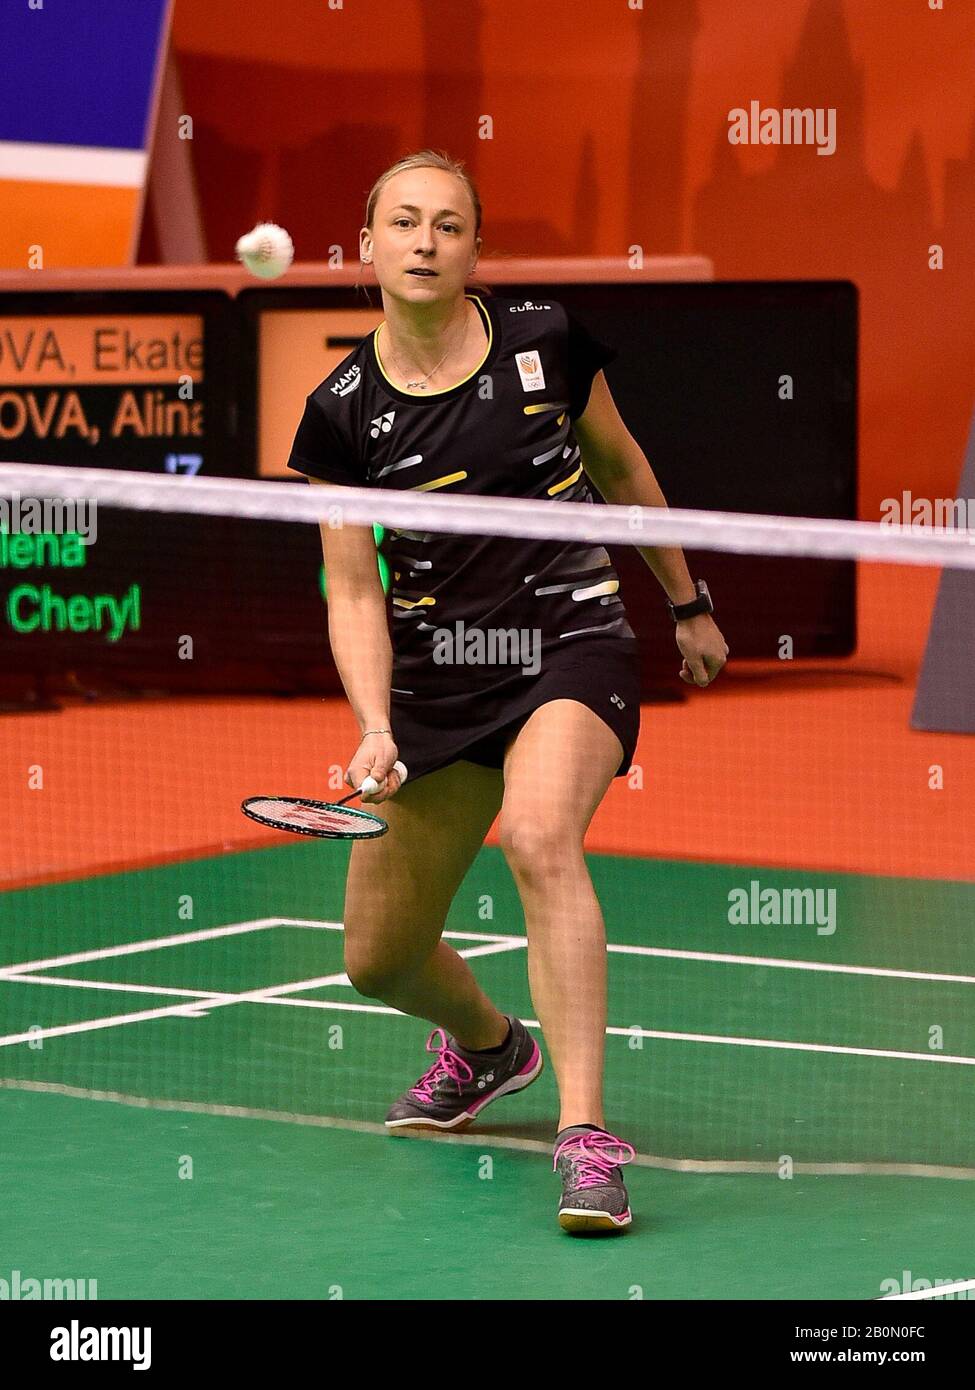 Barcelona, Spain. 20th Feb 2020. Barcelona Spain Master 2020 - Day 3;  Ekaterina Bolotova and Alina Davletova of Russia competes in the Women's  Double qualification Round 2 match against Selena Piek and